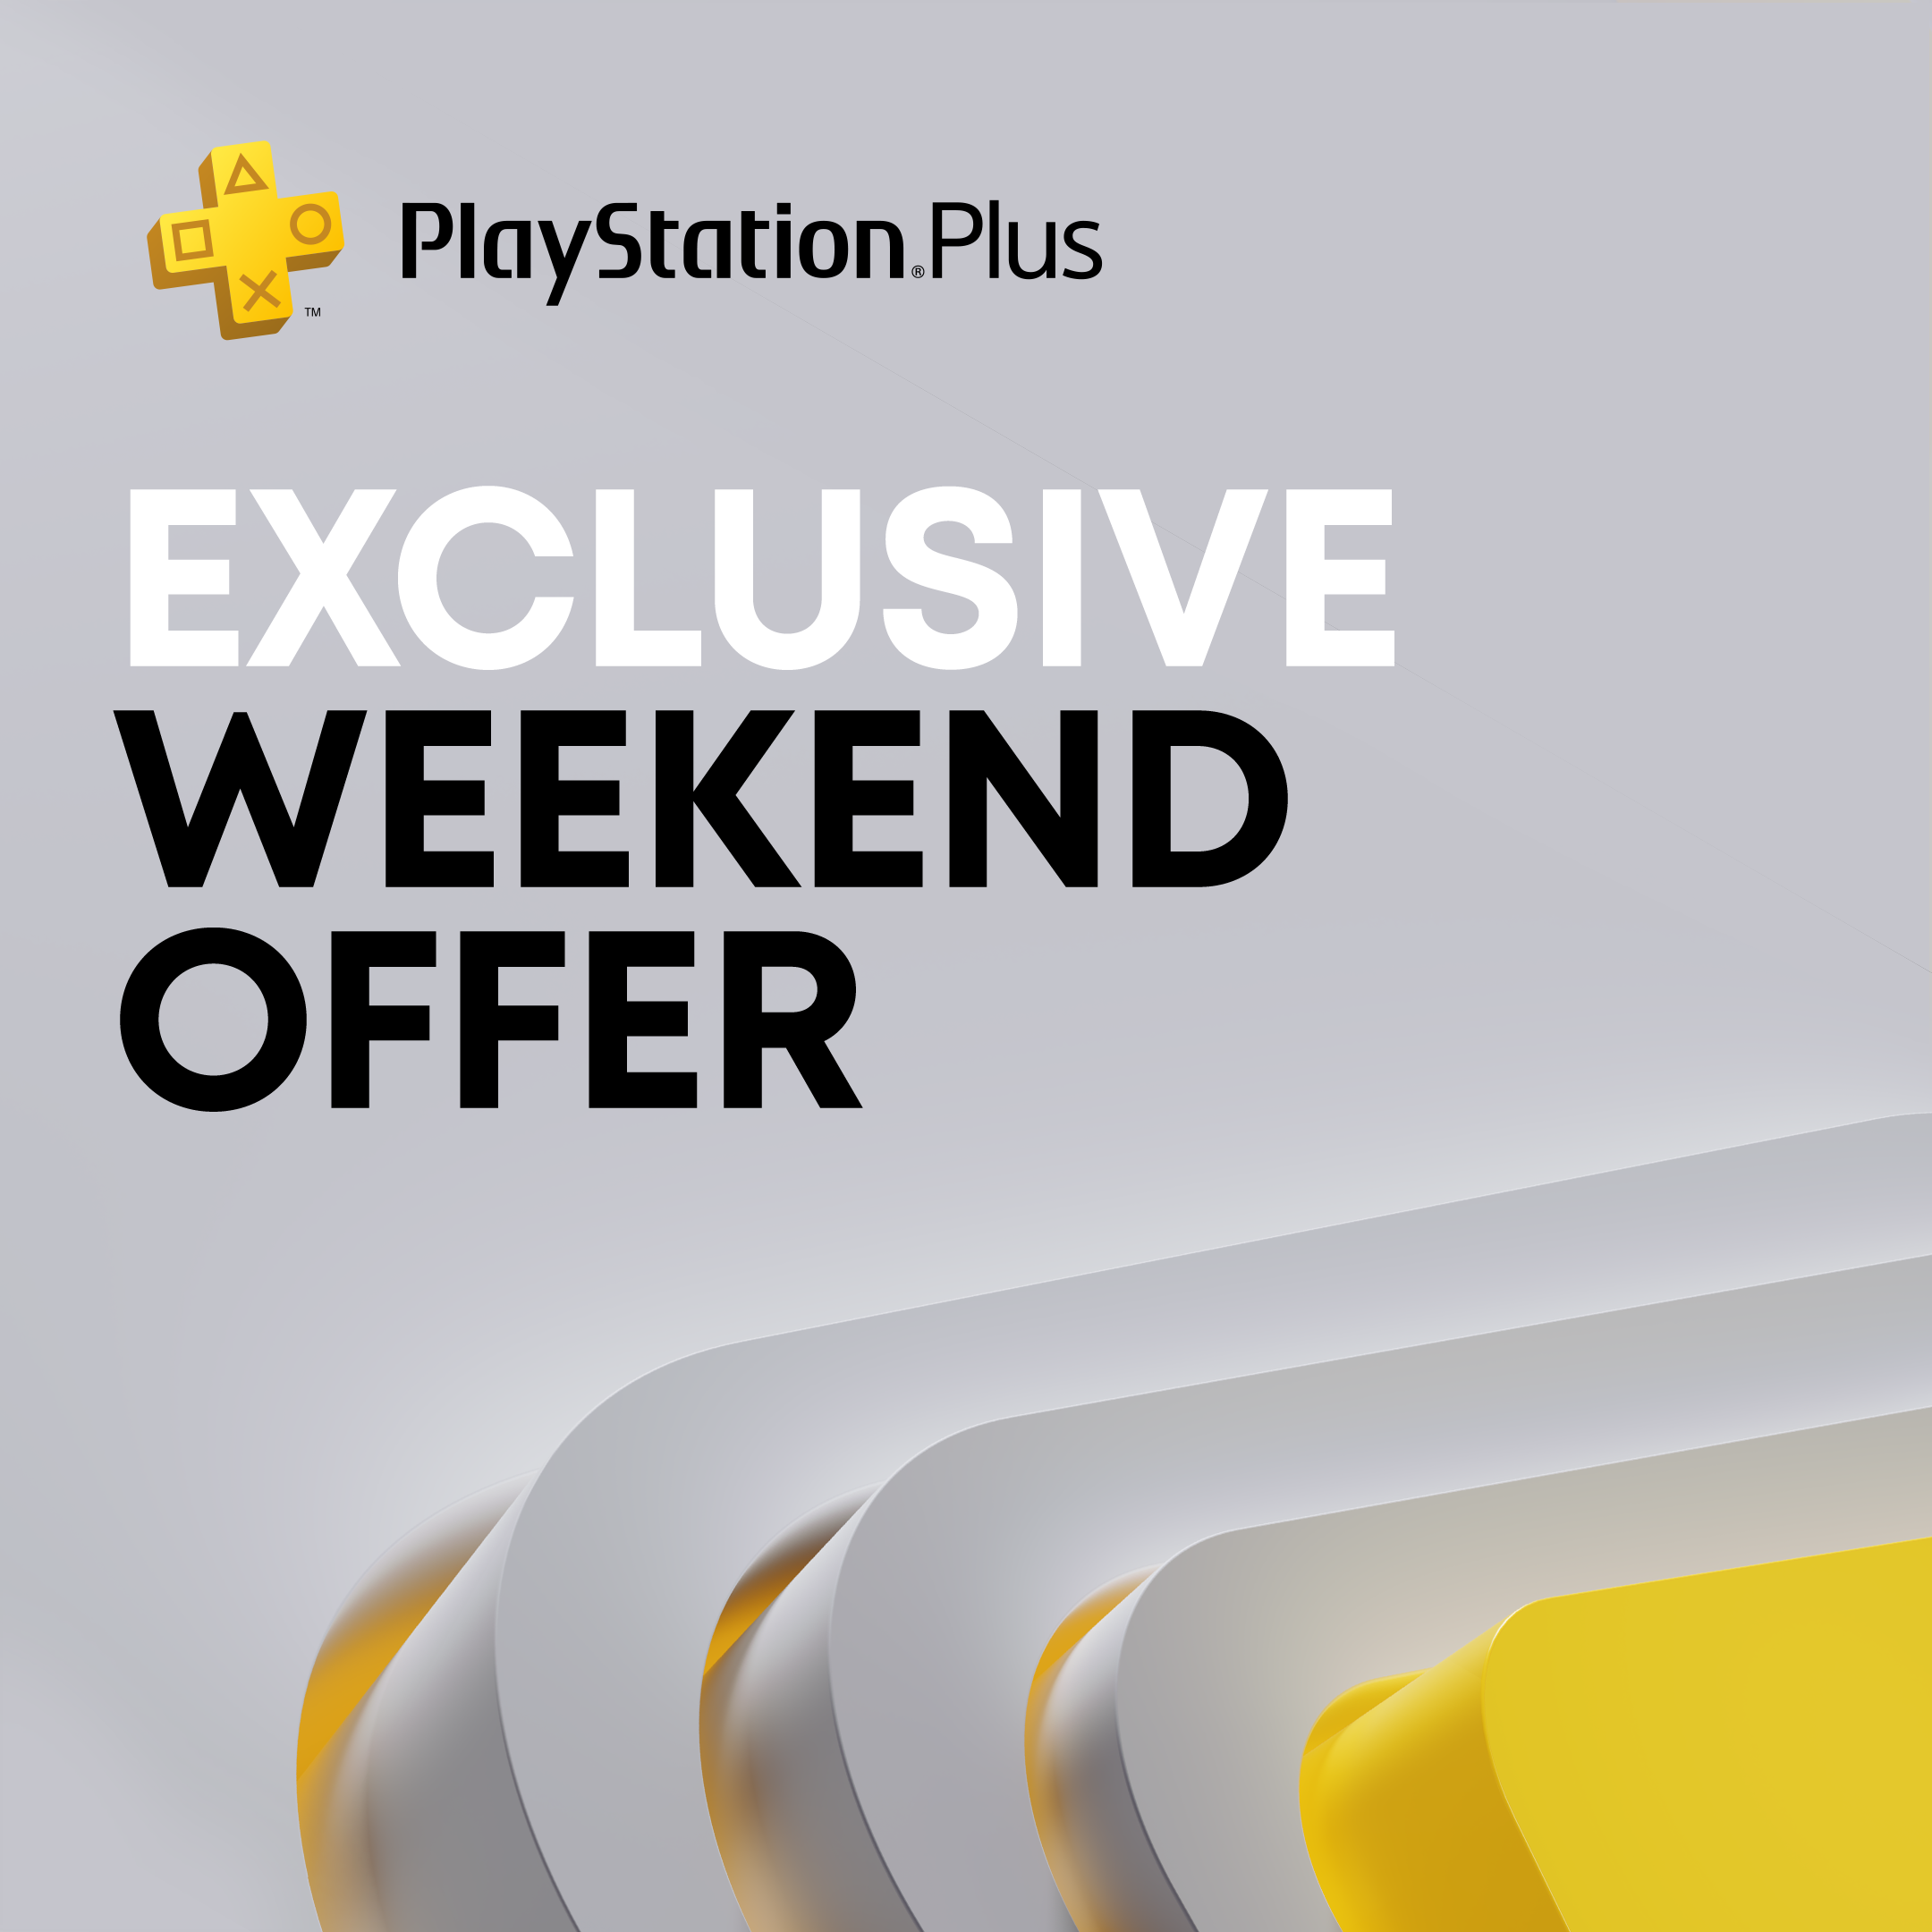 Games and Bundles Discounts in PlayStation Store